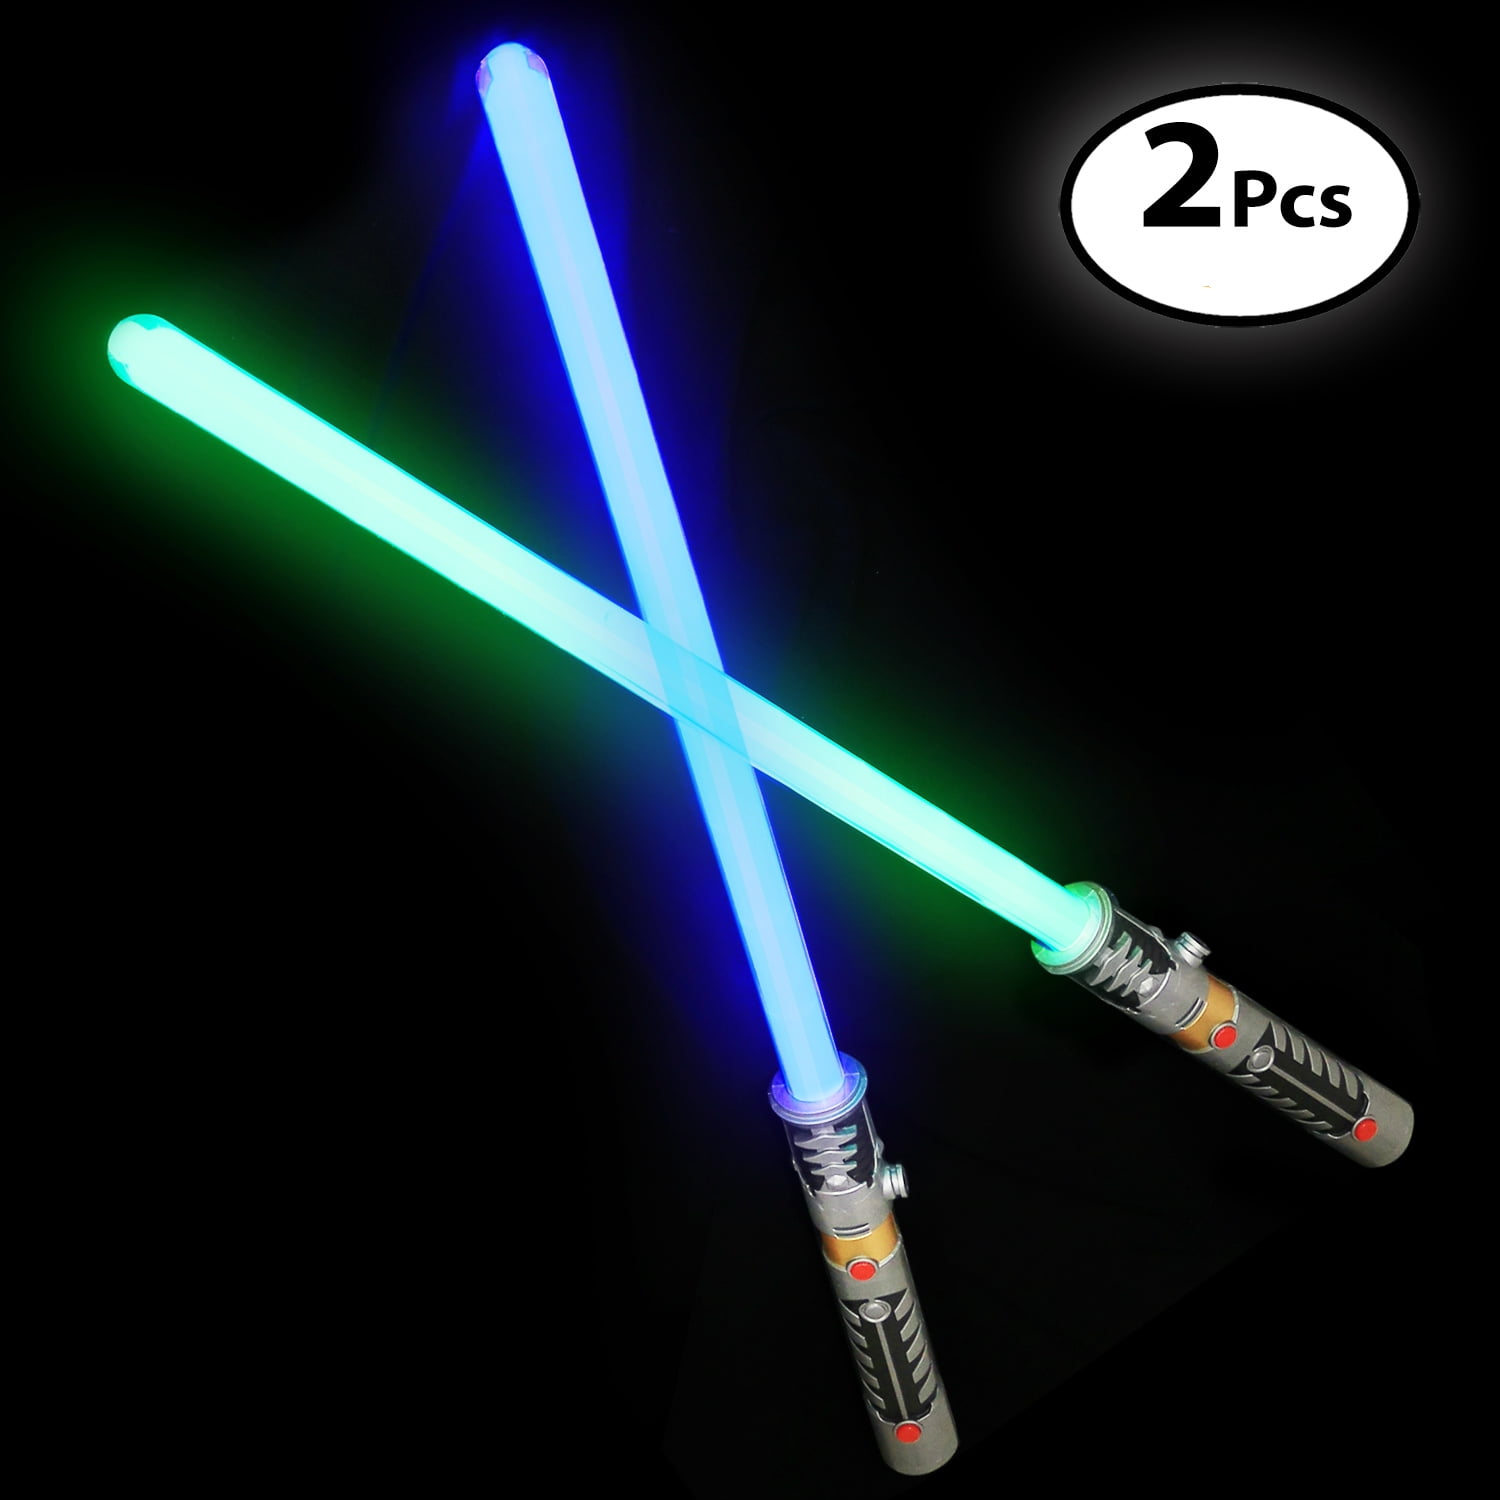 Elikliv 2PCS Halloween The Rise of Skywalker Foldable Retractable Lightsaber Double-Side Lightsaber Colorful Lightsaber Toy Jedi Scalable Weapons For Boys Girls Cosplay Gift